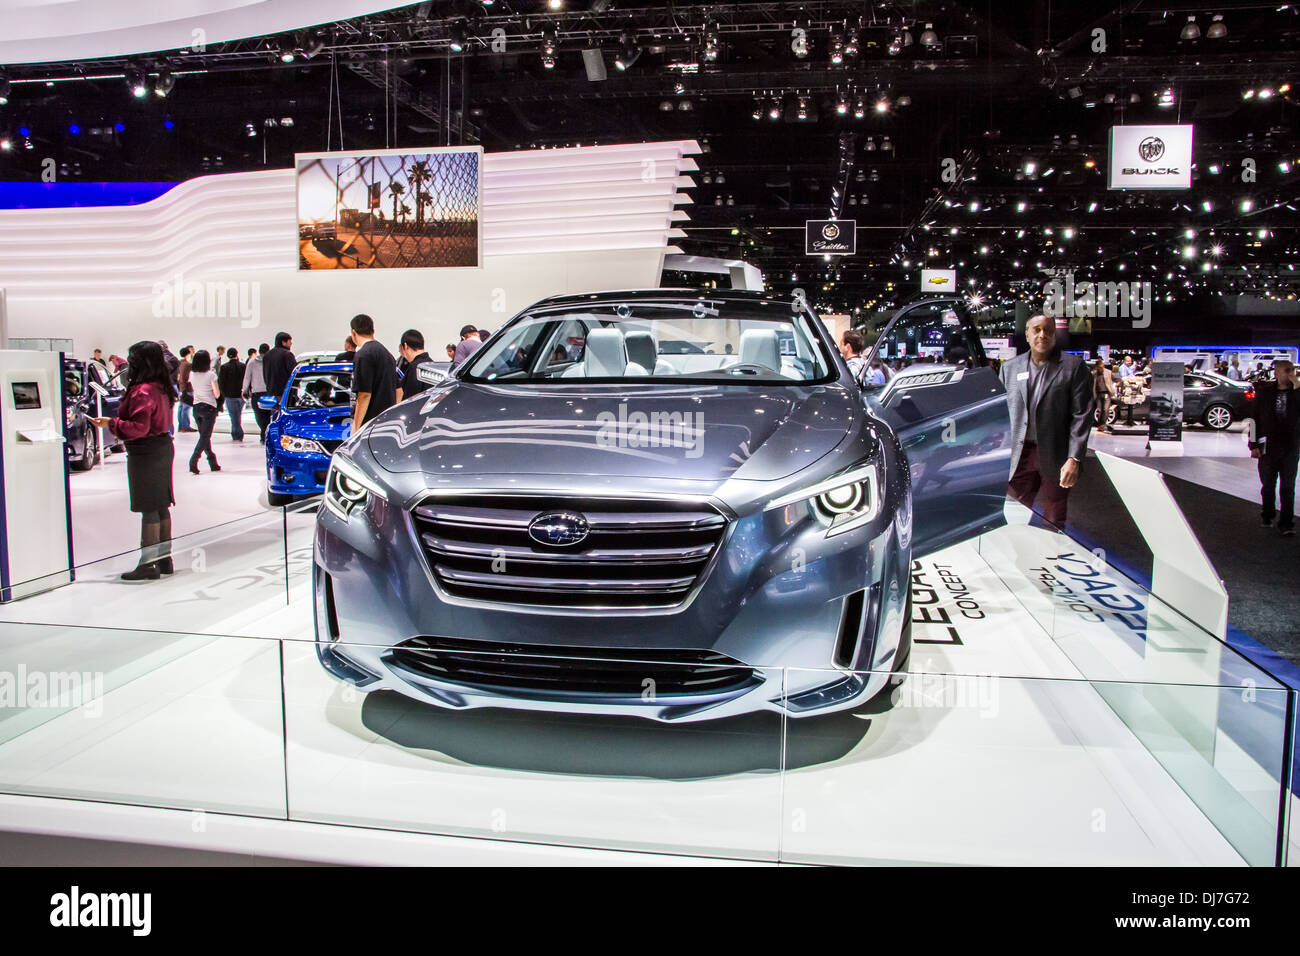 The Subaru Legacy concept car at the 2013 Los Angeles International Auto Show Stock Photo